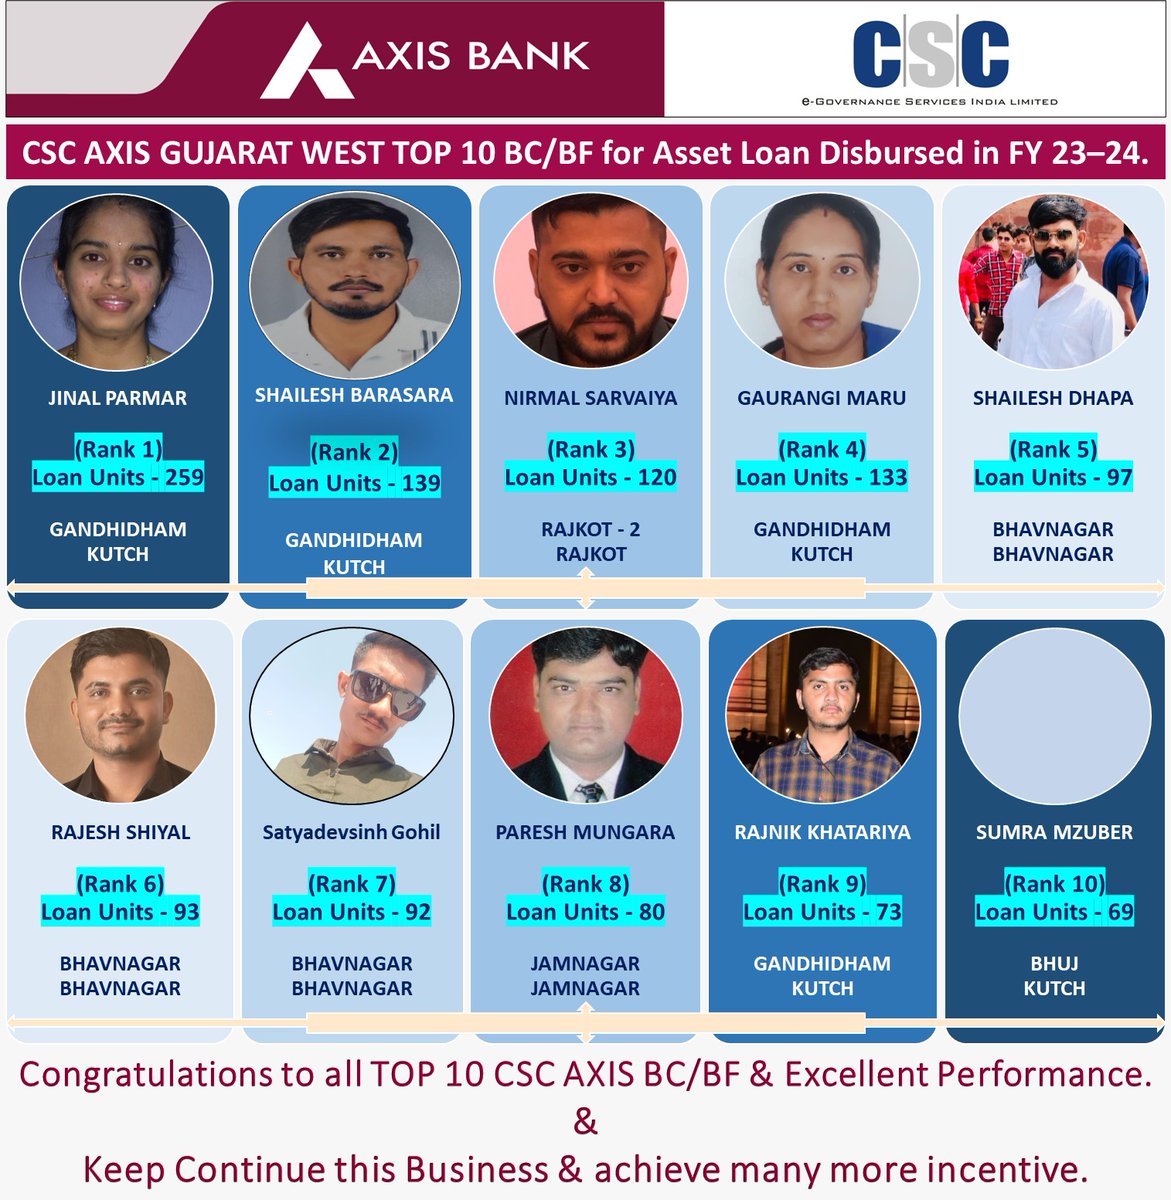 Congratulations!!!!!💐💐💐💐💐to all Top 10 Gujarat West CSC-Axis VLEs for their excellent performance in Loan disbursement in FY’23-24’.

#cscloan #csc #AxisBank #AxisBankLoan #digitalindia